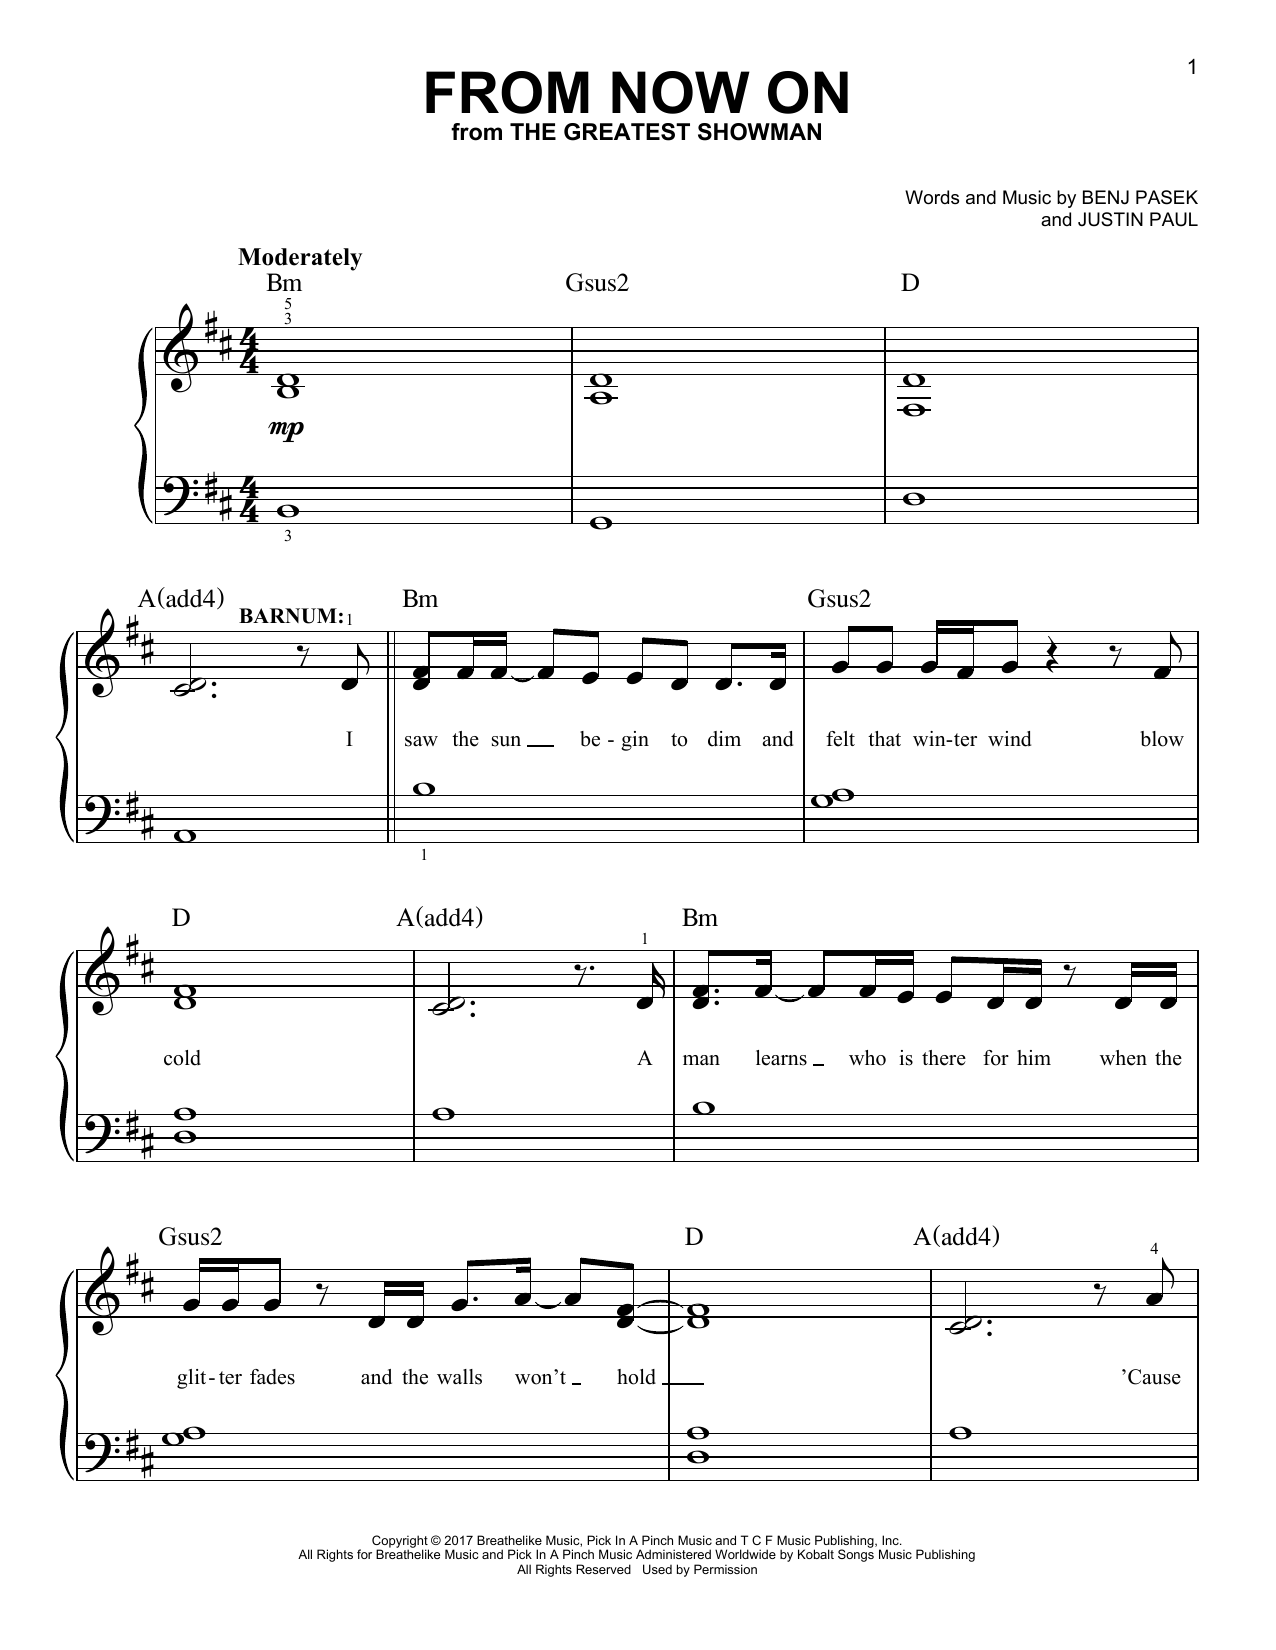 Download Pasek & Paul From Now On (from The Greatest Showman) Sheet Music